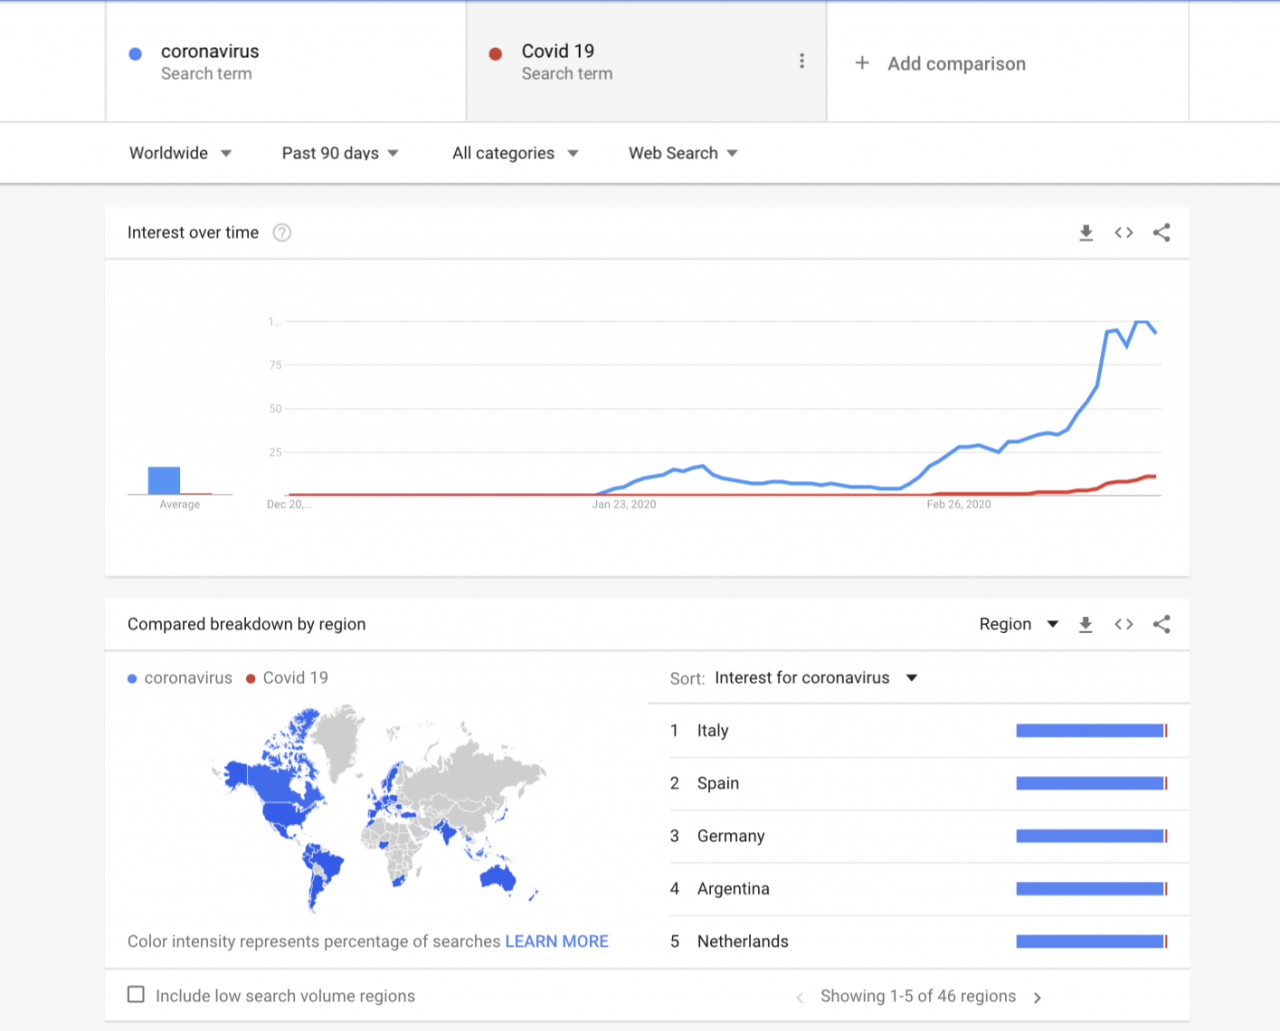 Screenshot of Google Trends showing search terms of covid 19 (without the hyphen) and coronavirus. Higher search result for coronavirus but showing more for covid 19 than covid-19